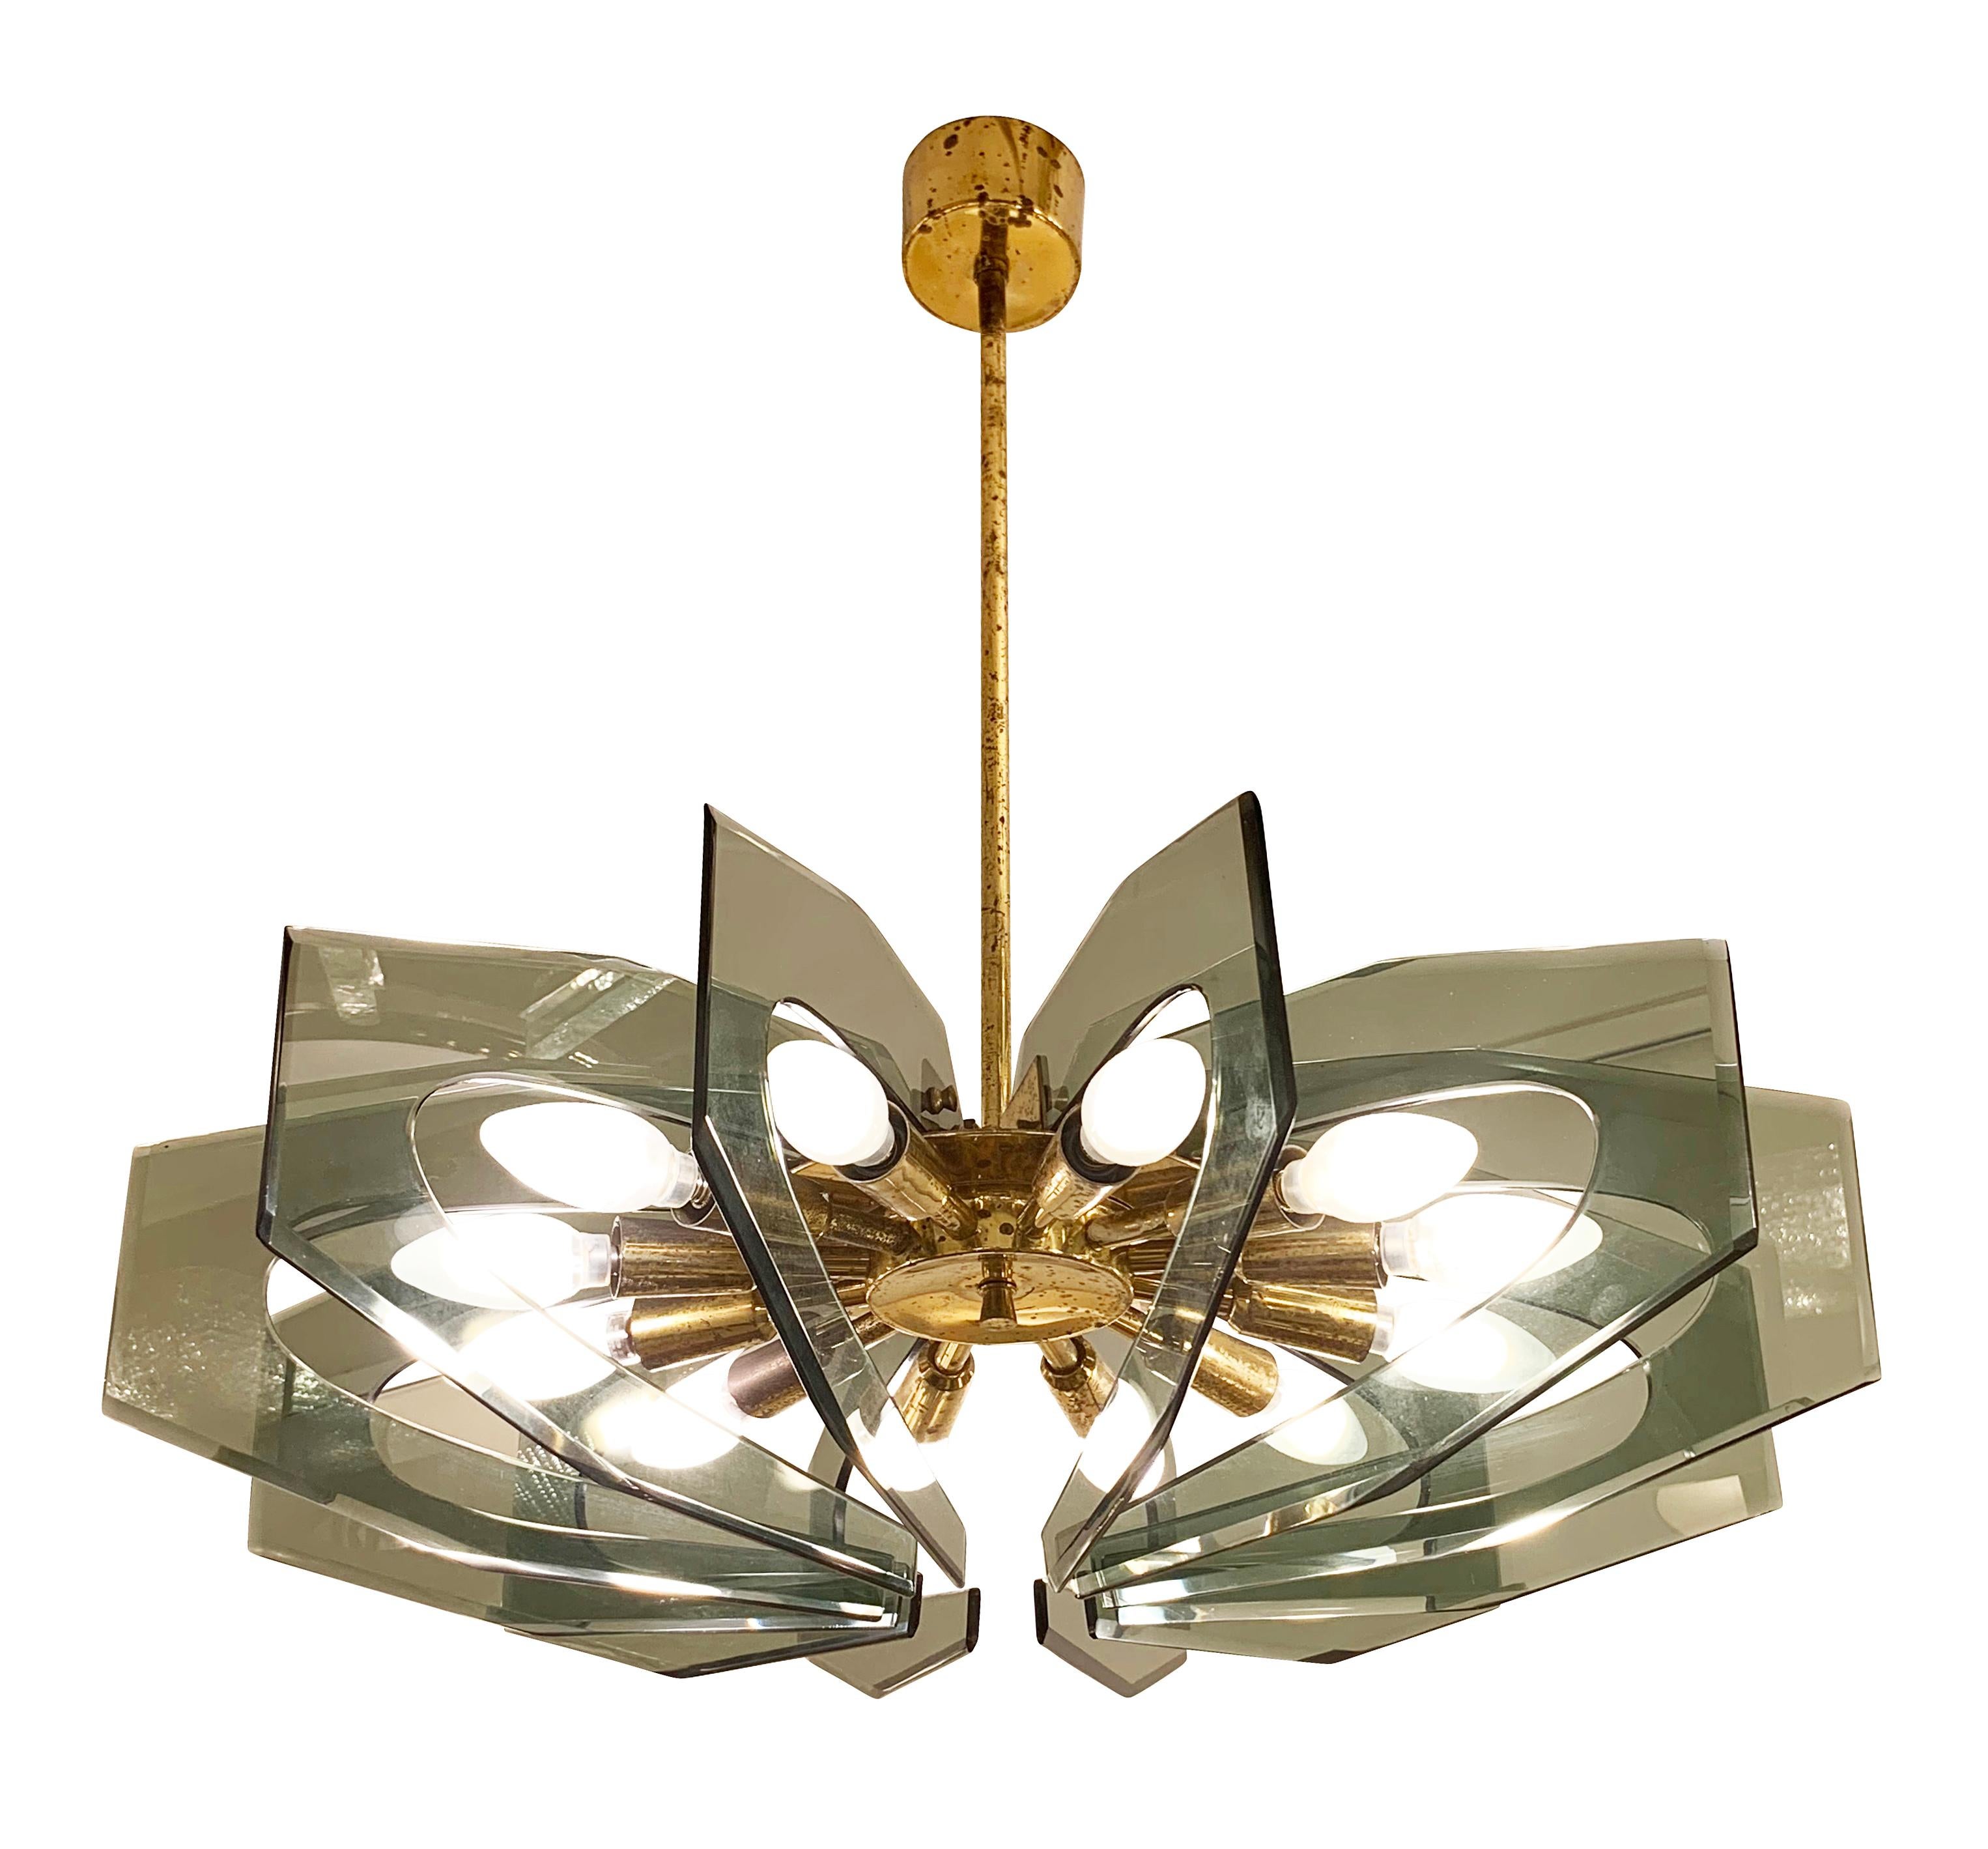 Italian Mid-Century chandelier by Paroldo with green smoked glasses on a brass frame. Each glass piece is meticulously cut and beveled. Holds twelve candelabra sockets. Height of stem can be adjusted.

Condition: Excellent vintage condition, minor